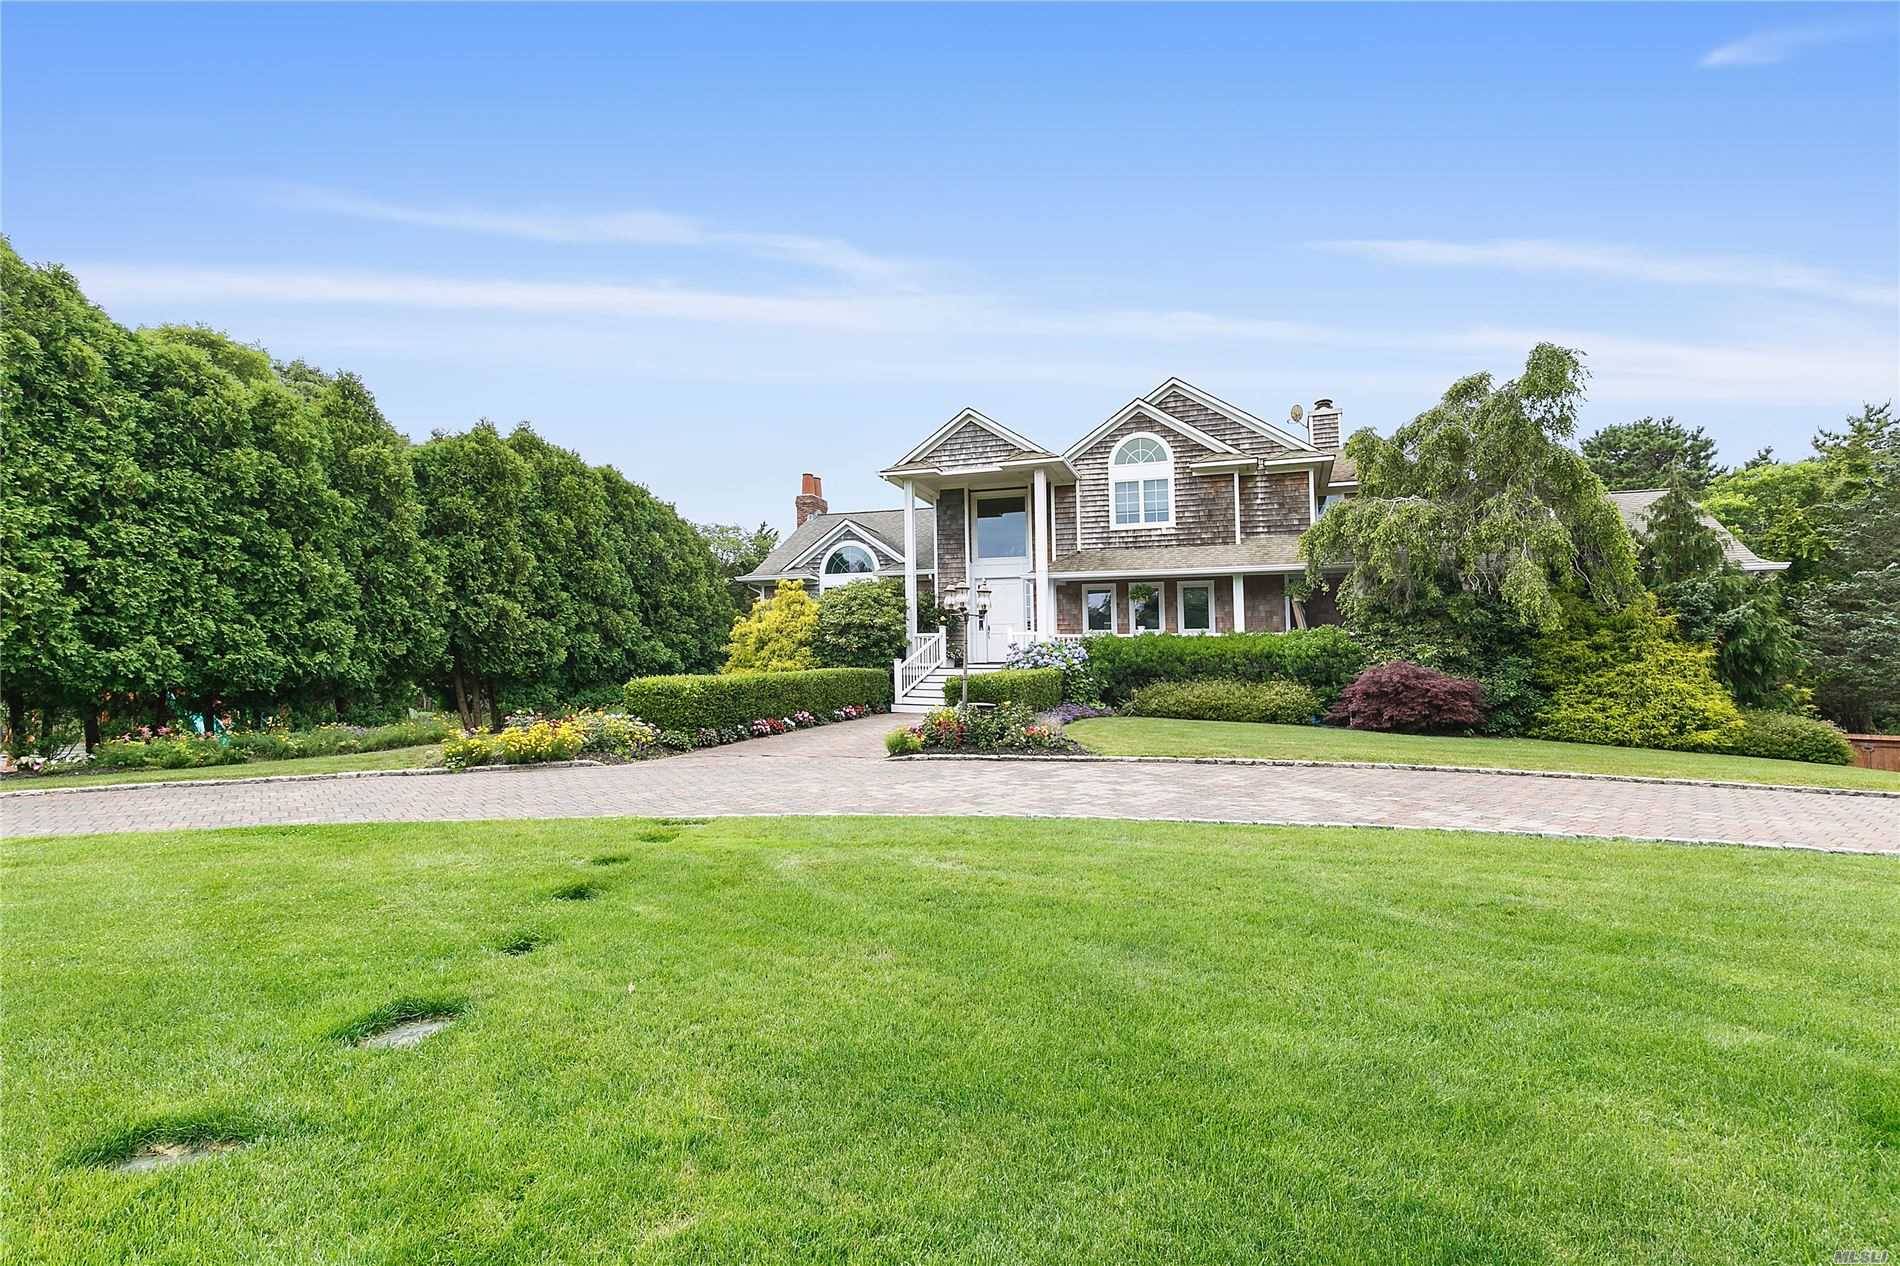 Situated on nearly 2. 8 secluded acres of luscious grounds in Westhampton sits this stunning Post Modern.